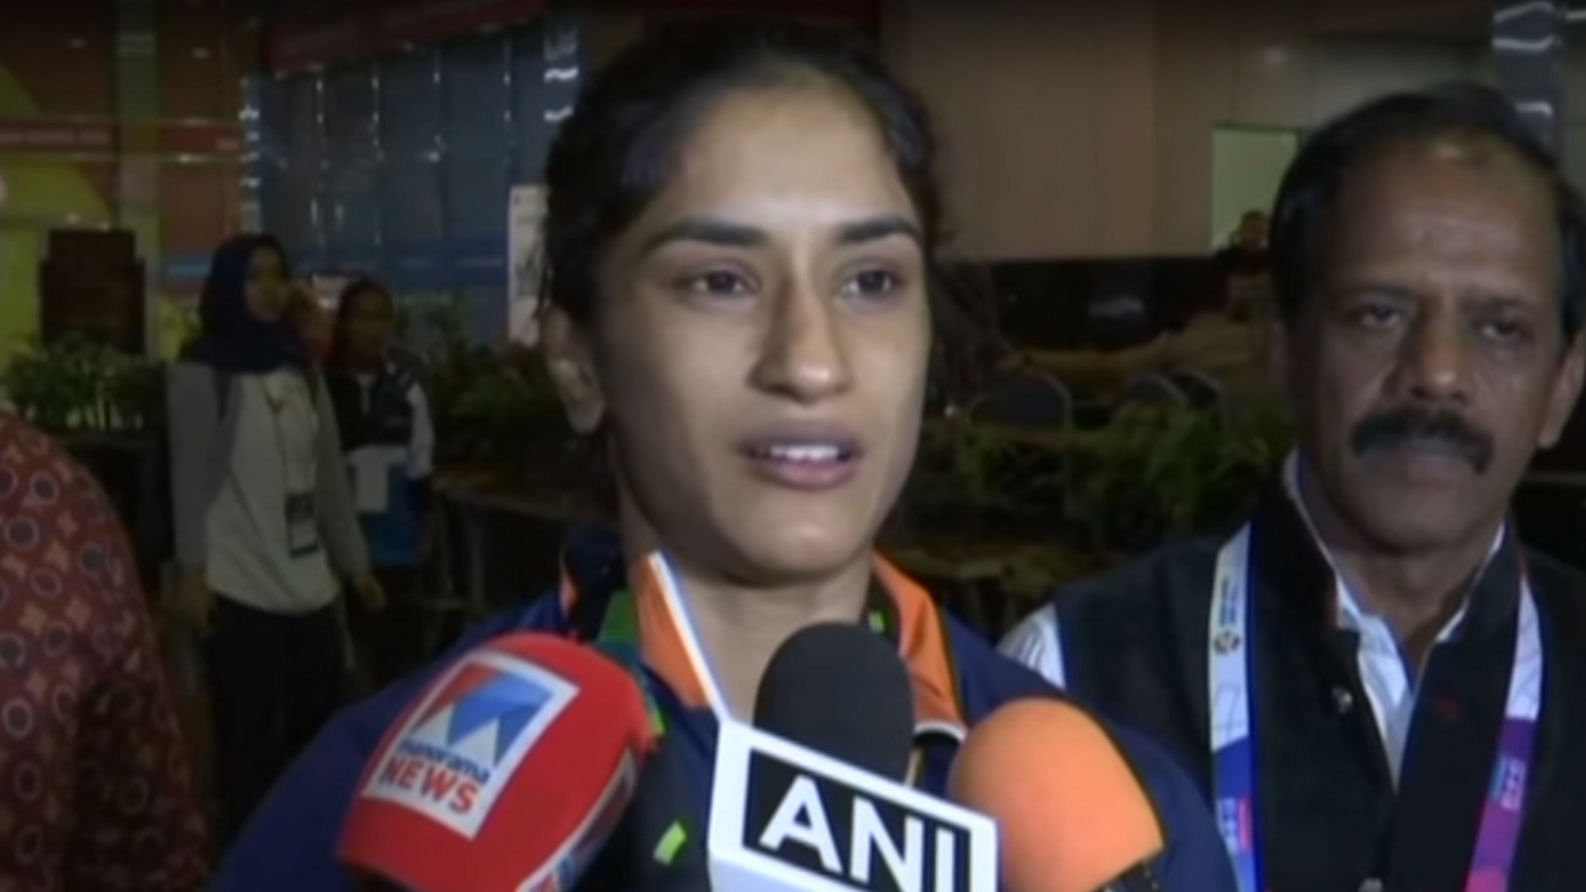 Vinesh Phogat speaks to the media after bagging a gold medal at the Asian Games.